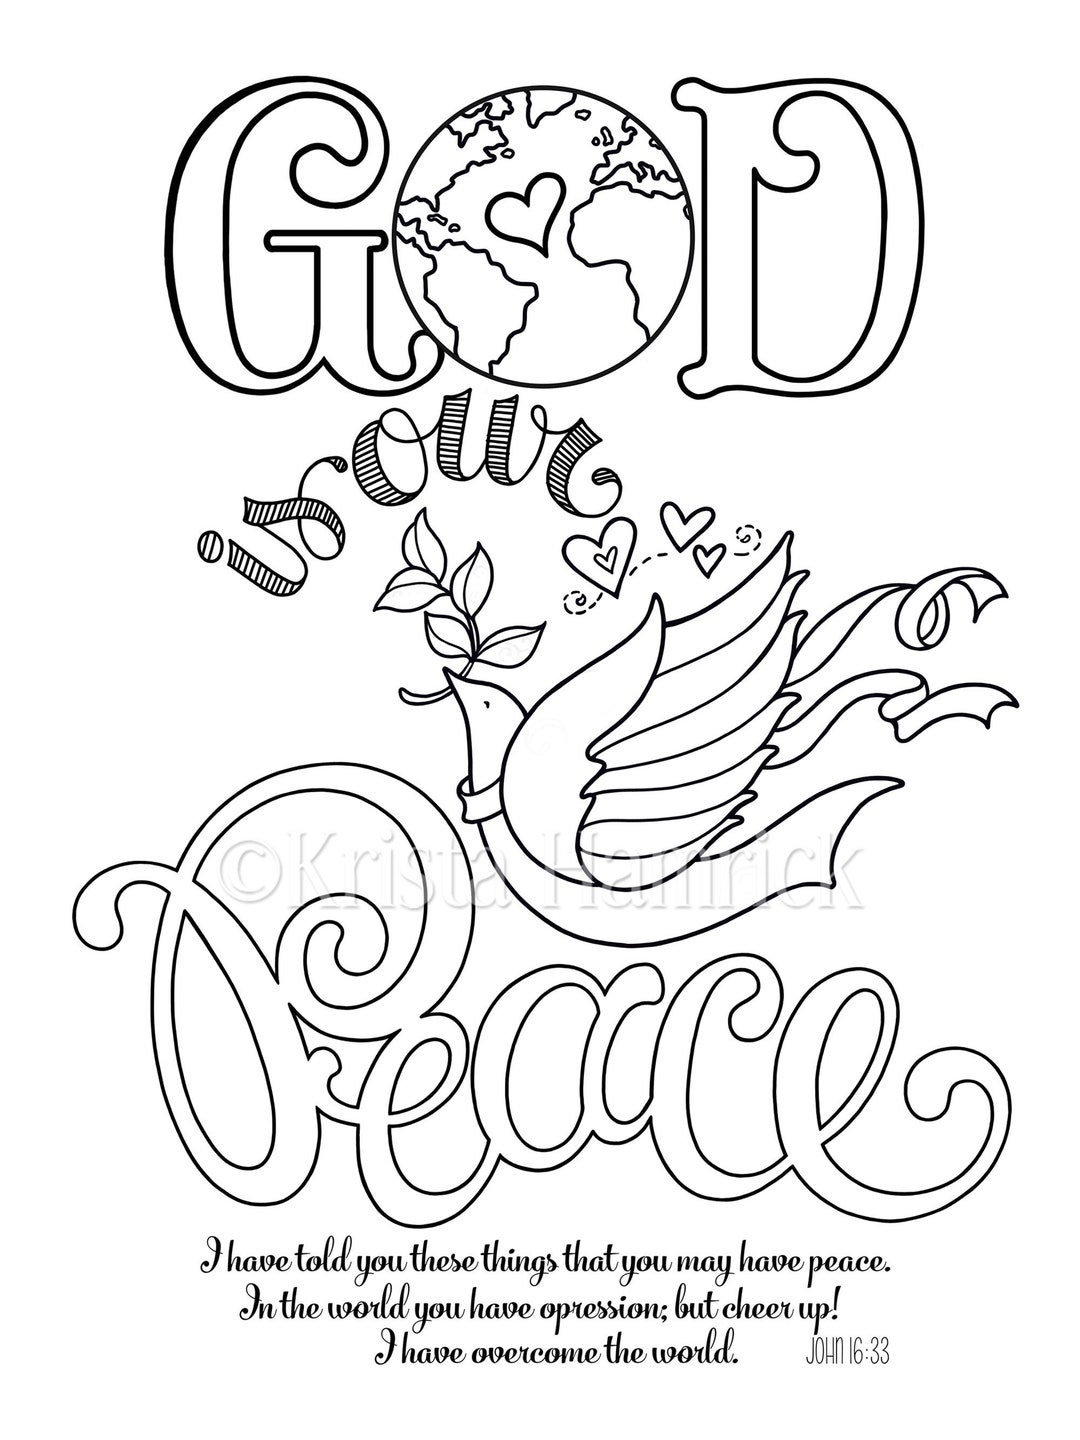 God is our peace coloring page x bible journaling tip